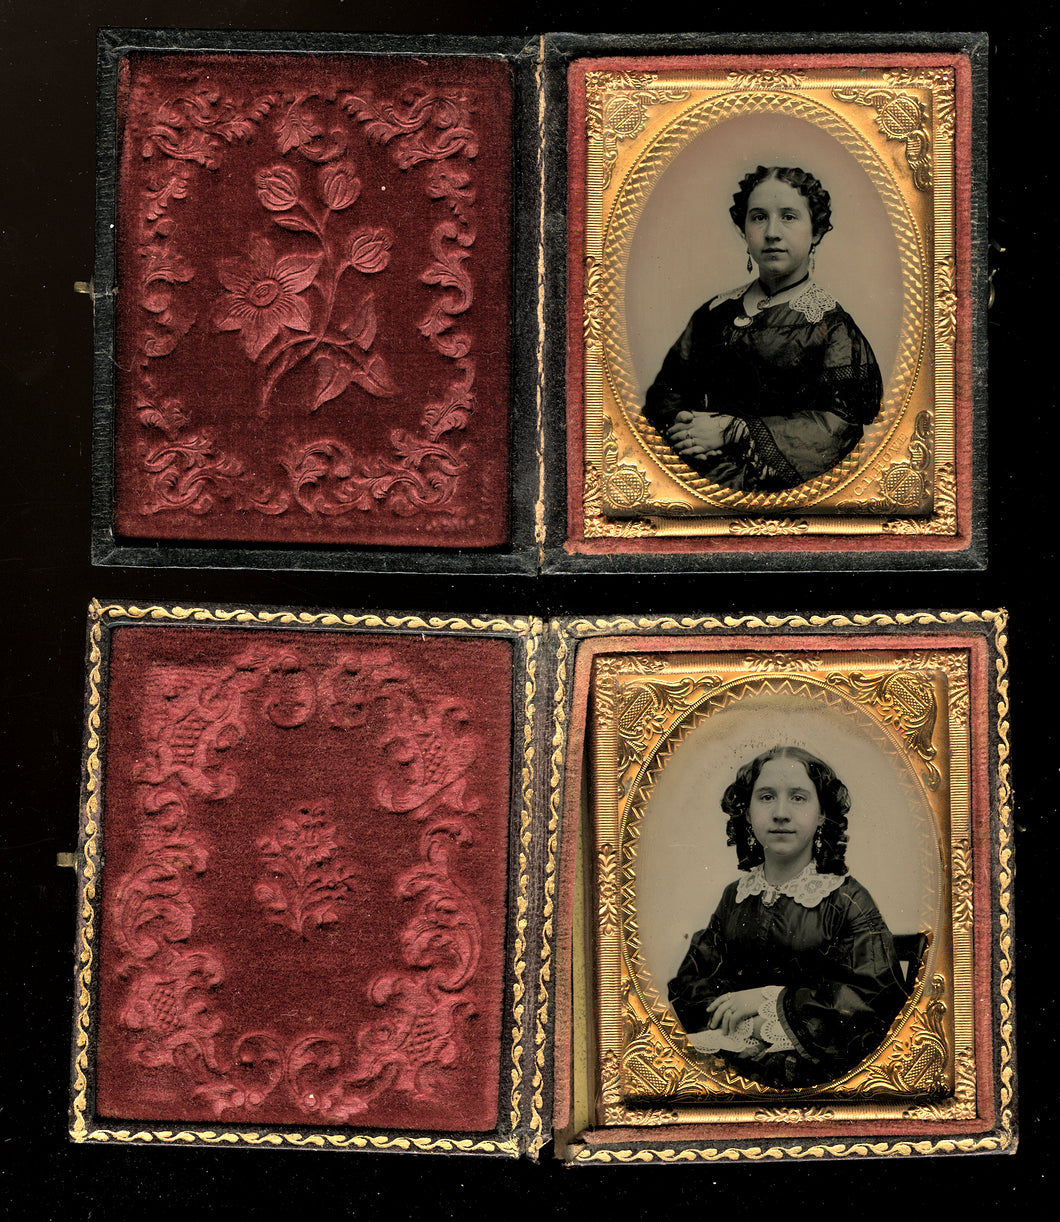 2 Sphereotype / Ambrotypes of Same Woman by Vermont Photographer Caleb L Howe